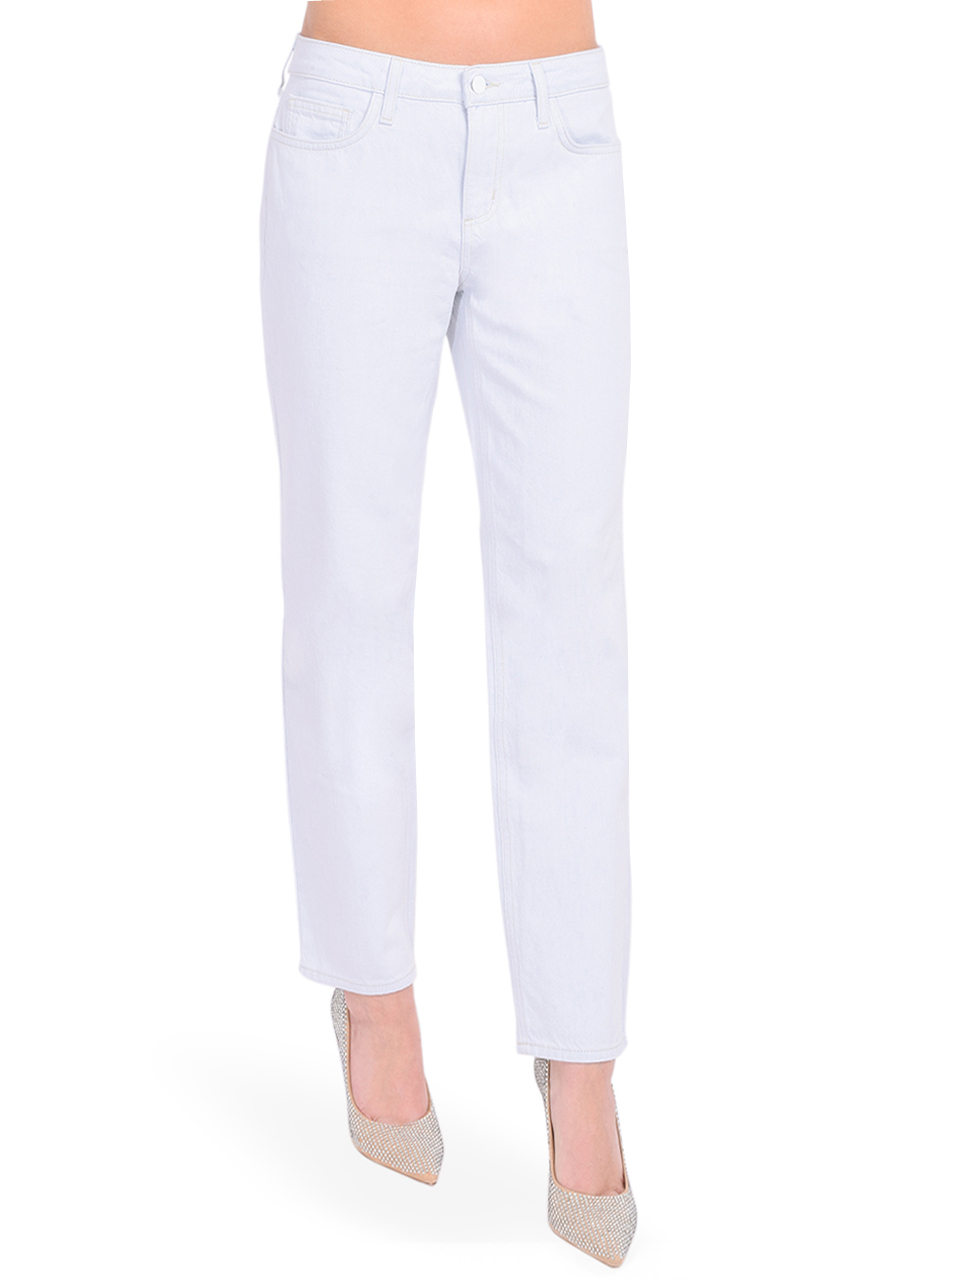 L'AGENCE Mateo Slouchy Straight Leg Jean in Blue Frost Side View 